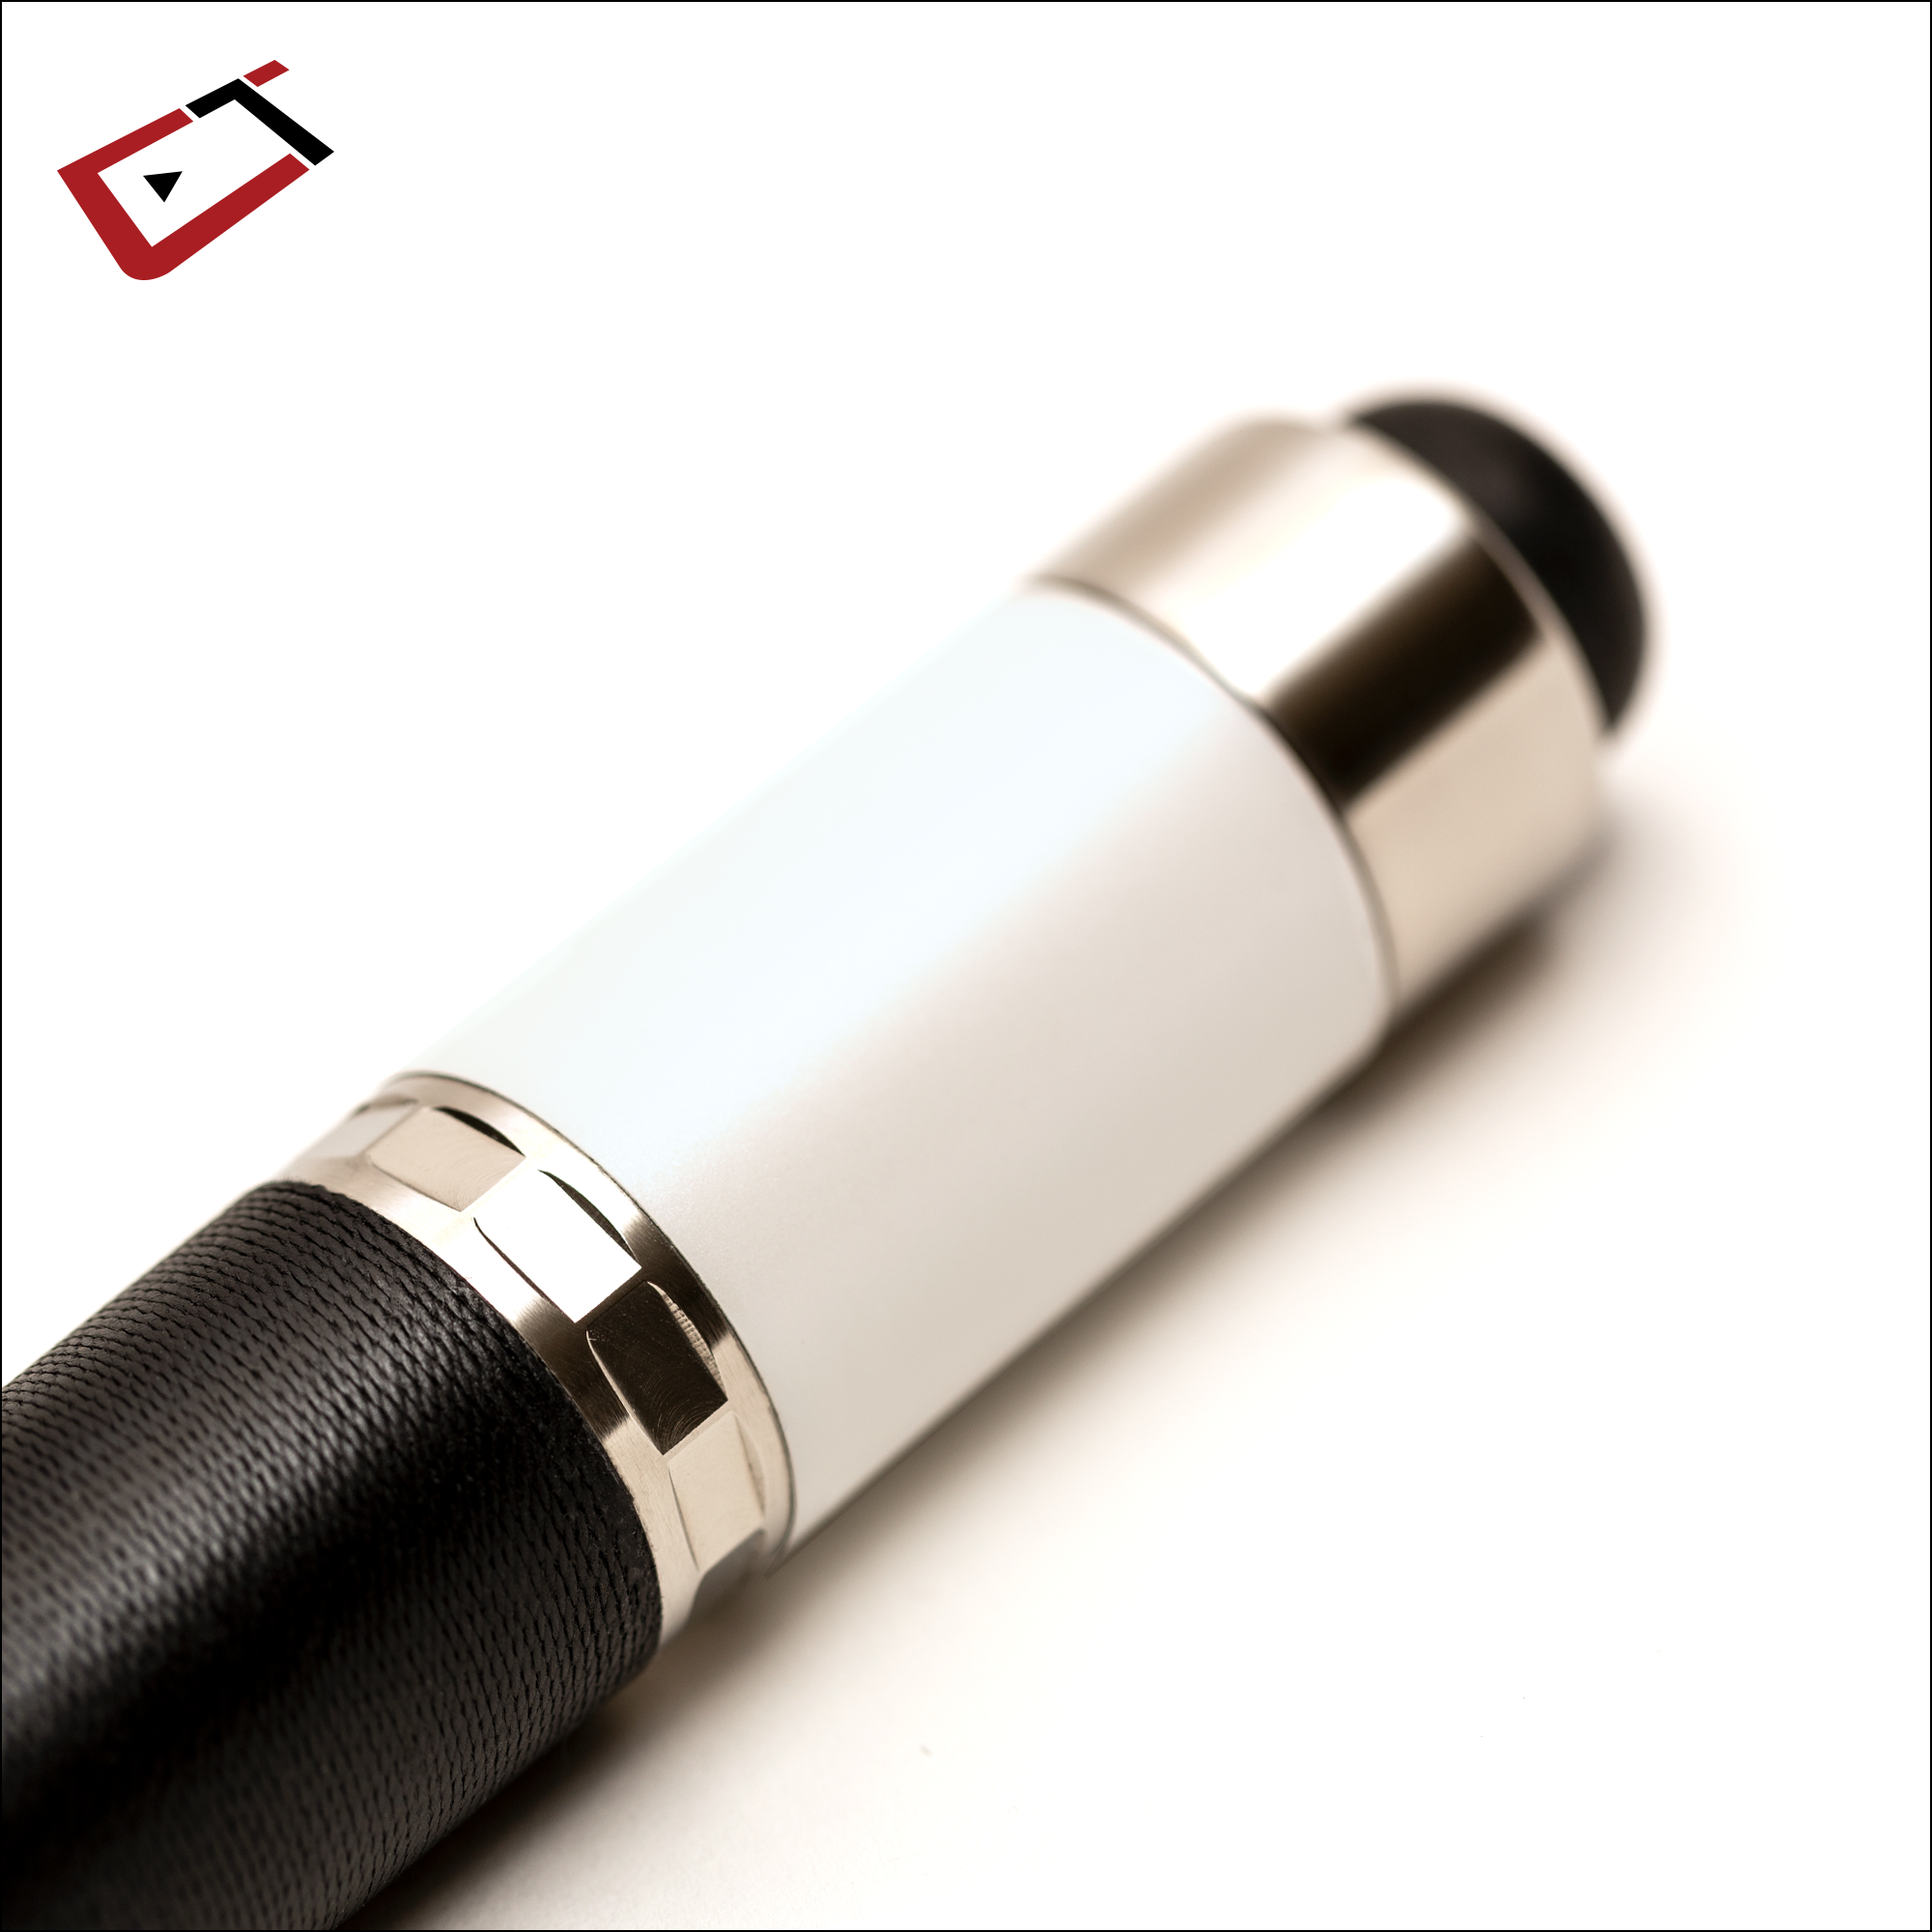 CYNERGY SVB GEN ONE, PEARL WHITE | Cuetec